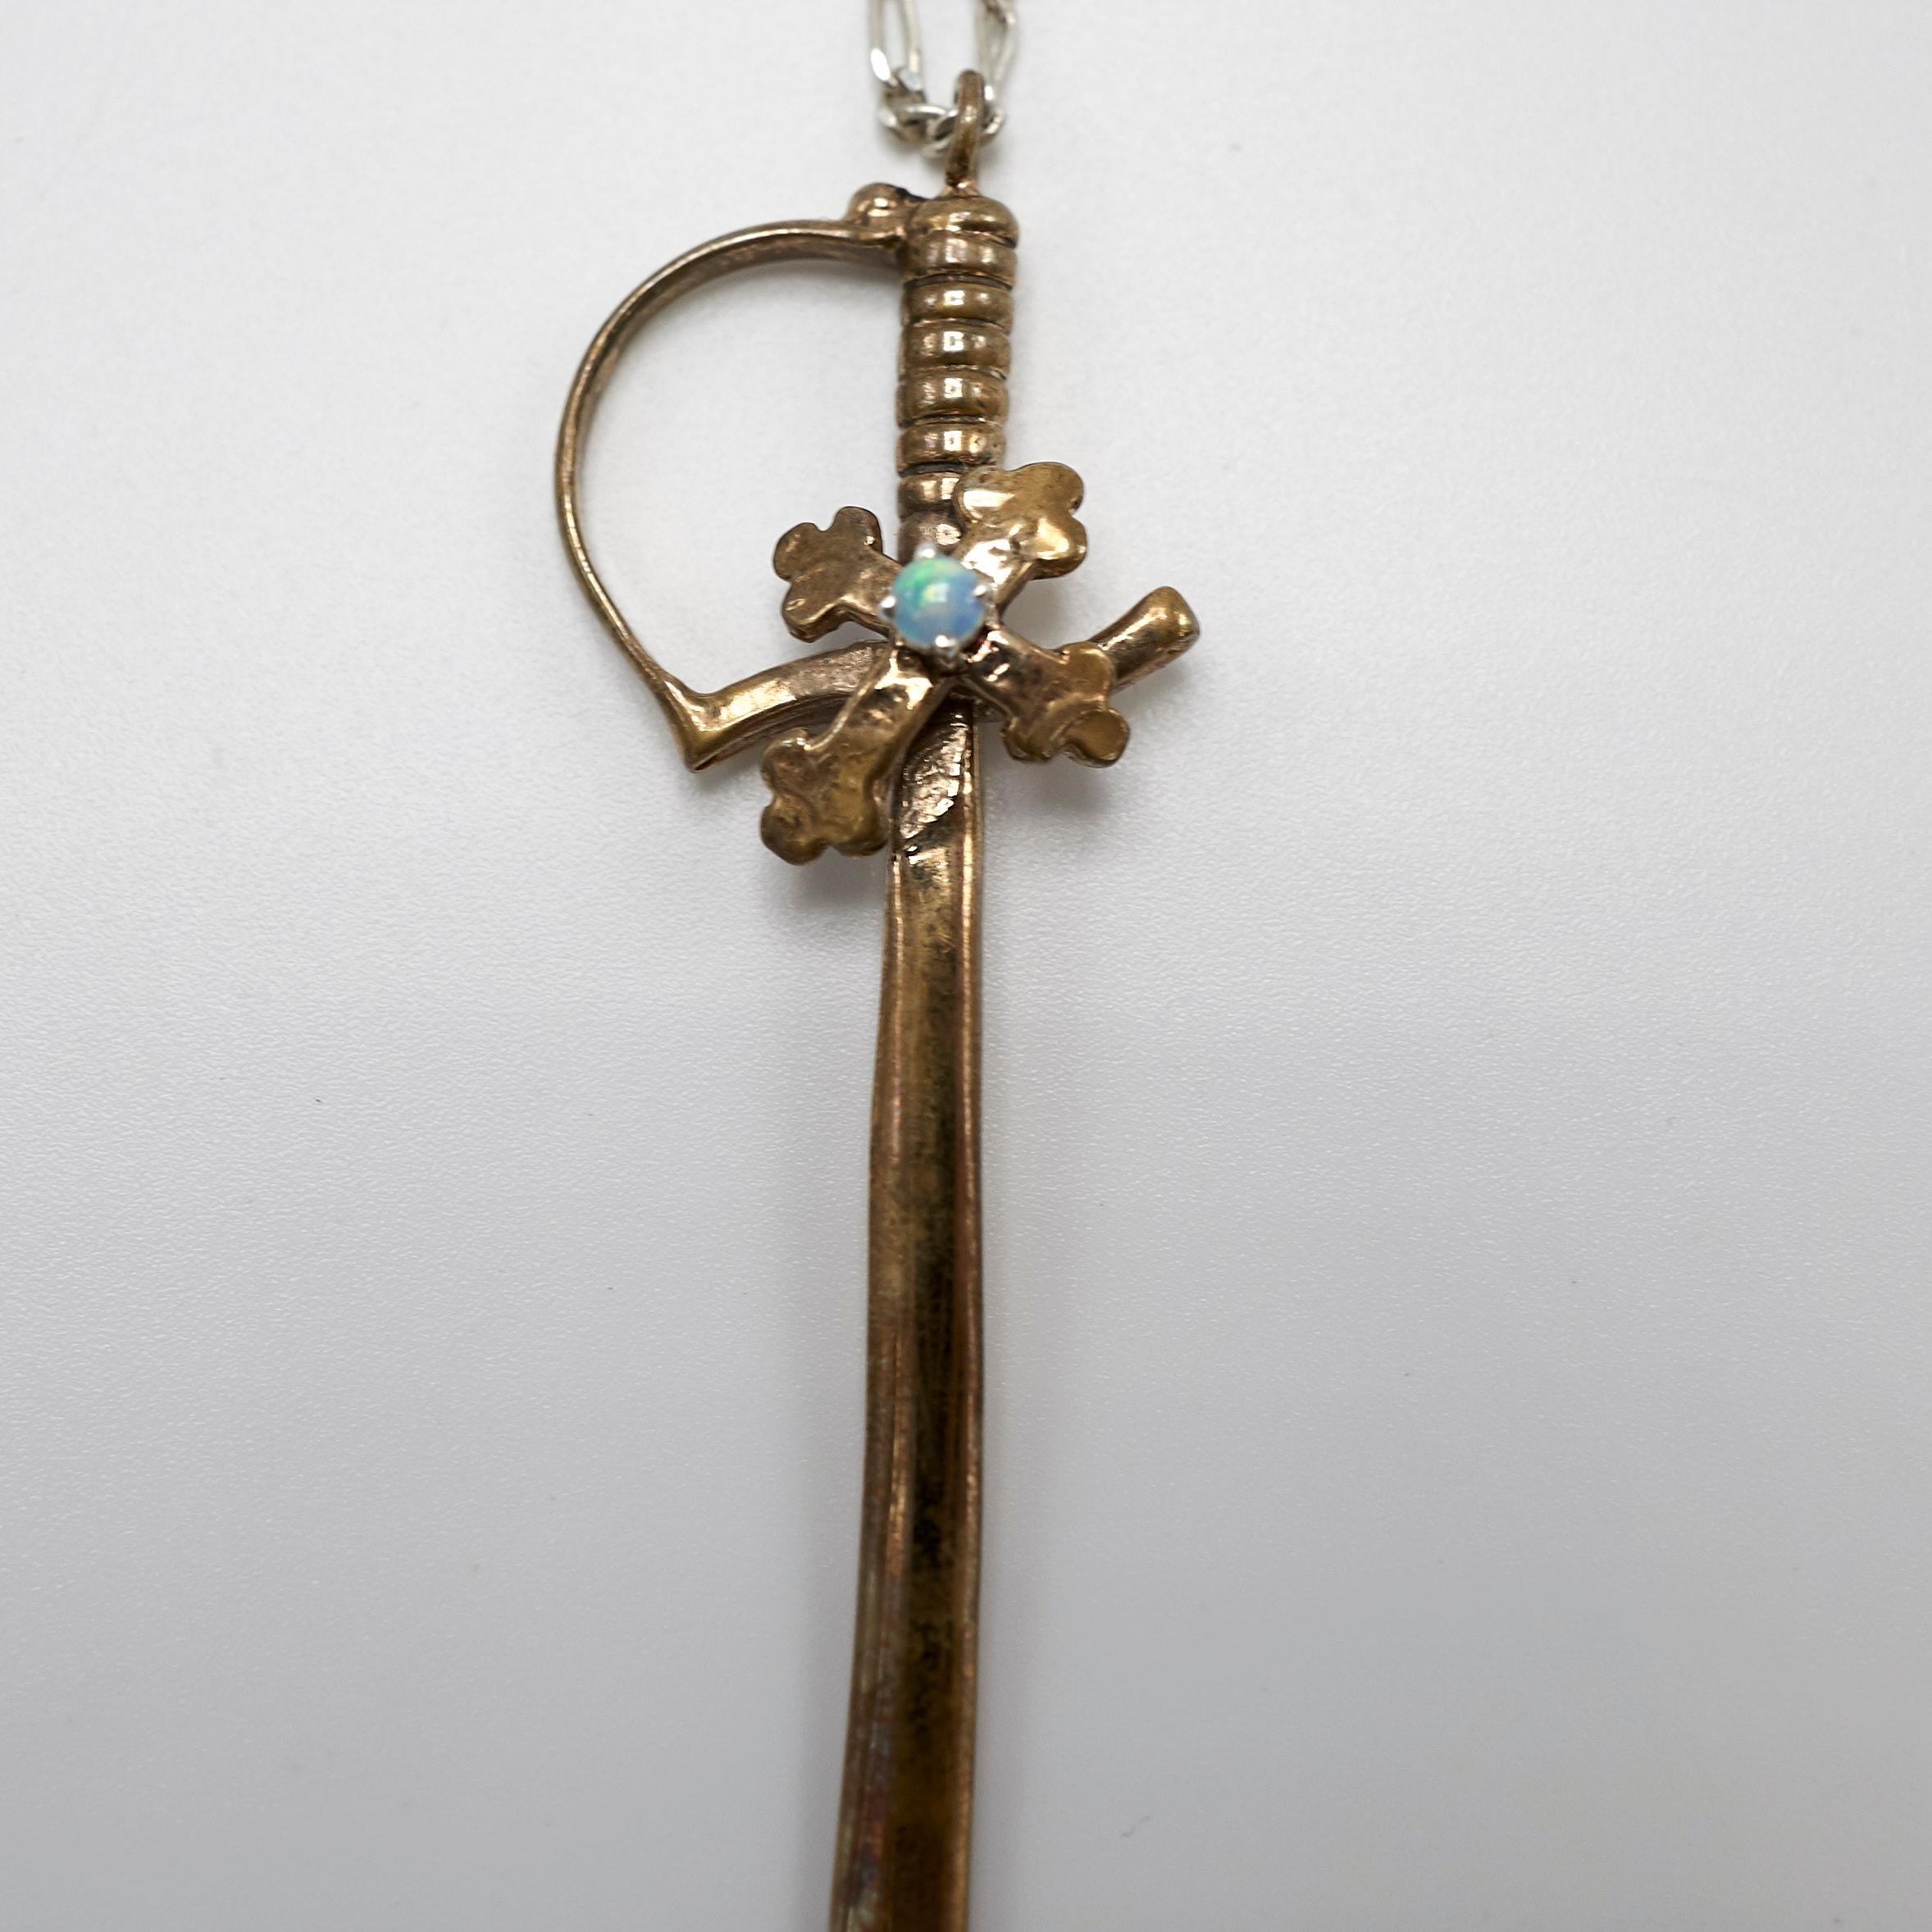 Opal Sword  Bronze Gold Filled Chain Necklace J Dauphin

Hand made in Los Angeles

Available for immediate delivery